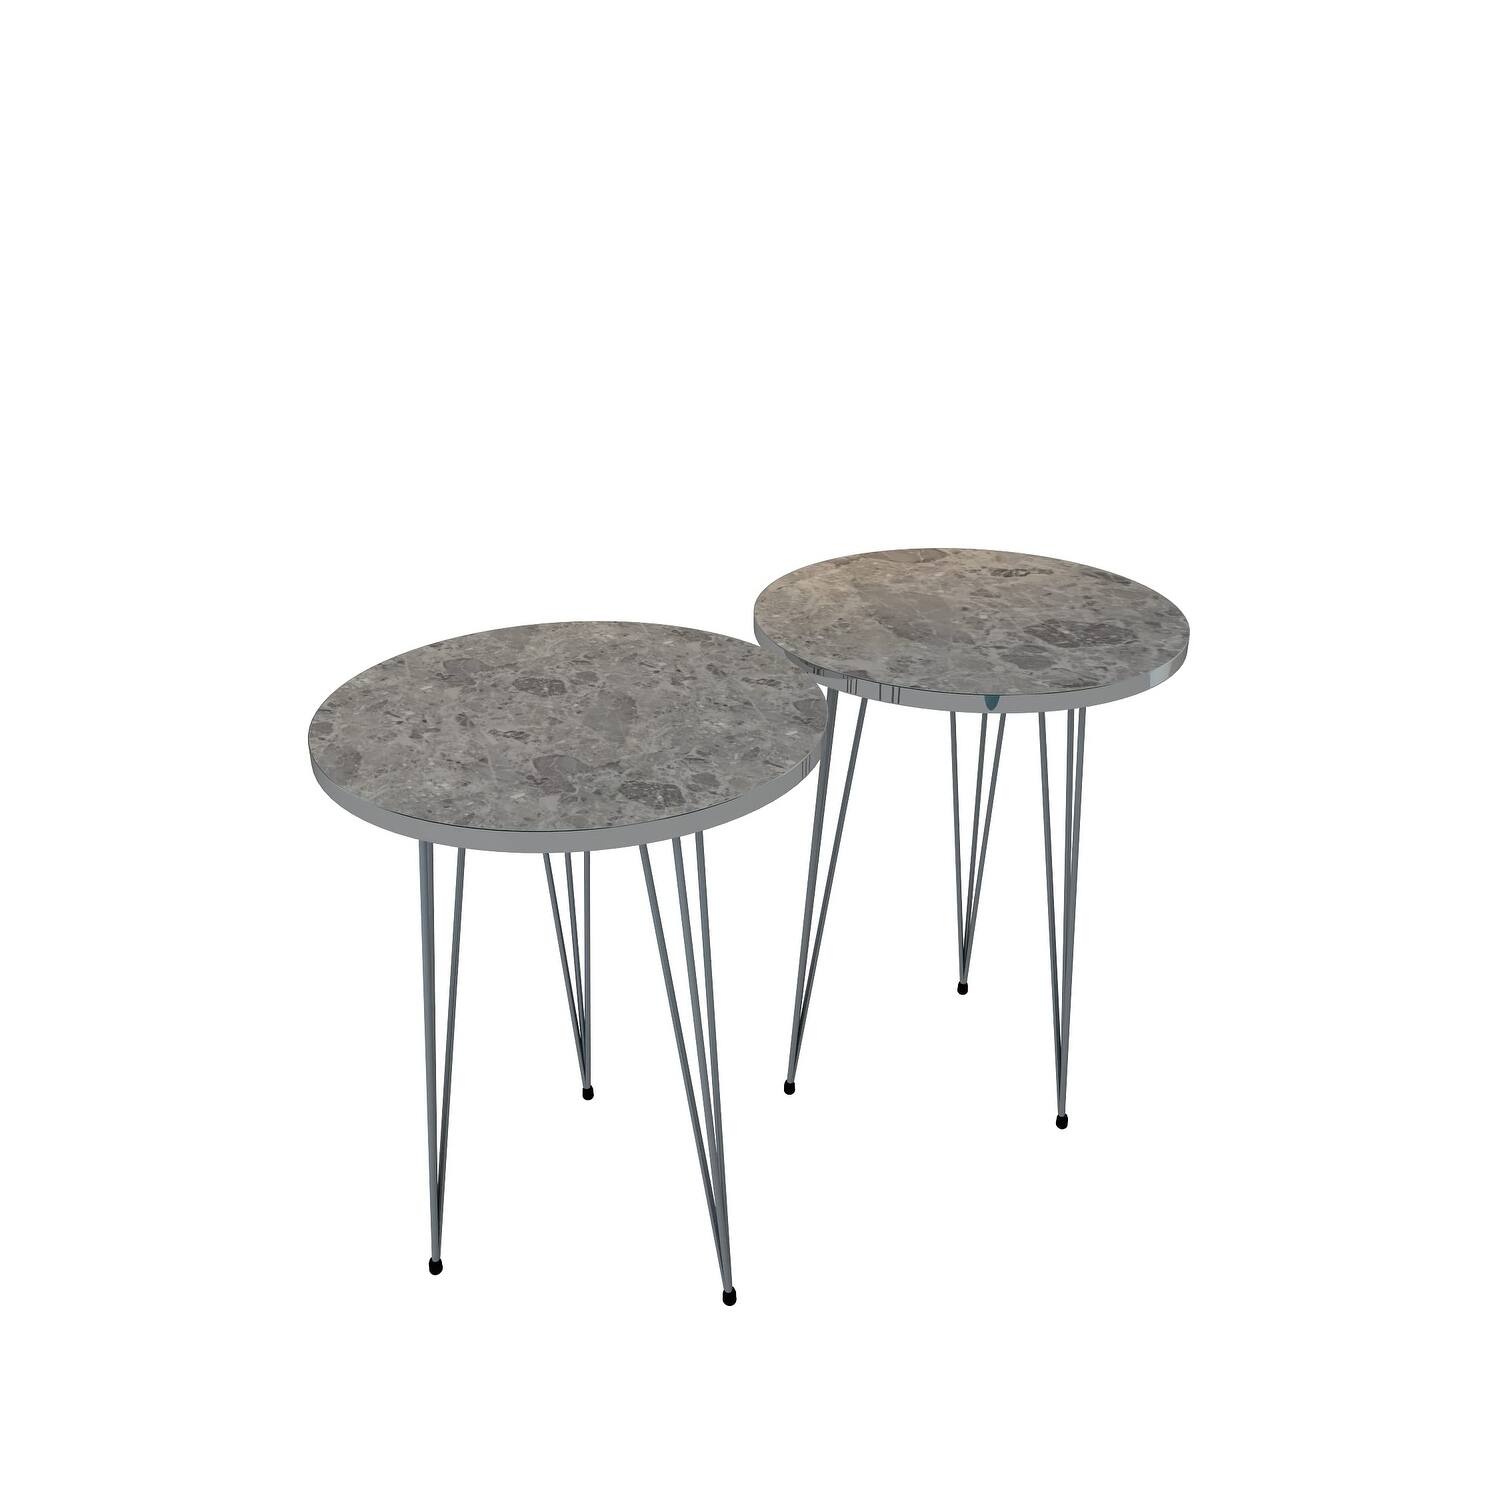 Set of 2 High Gloss Grey Marble Silver Legs End Tables Round Wood Sofa Side Coffee Tables